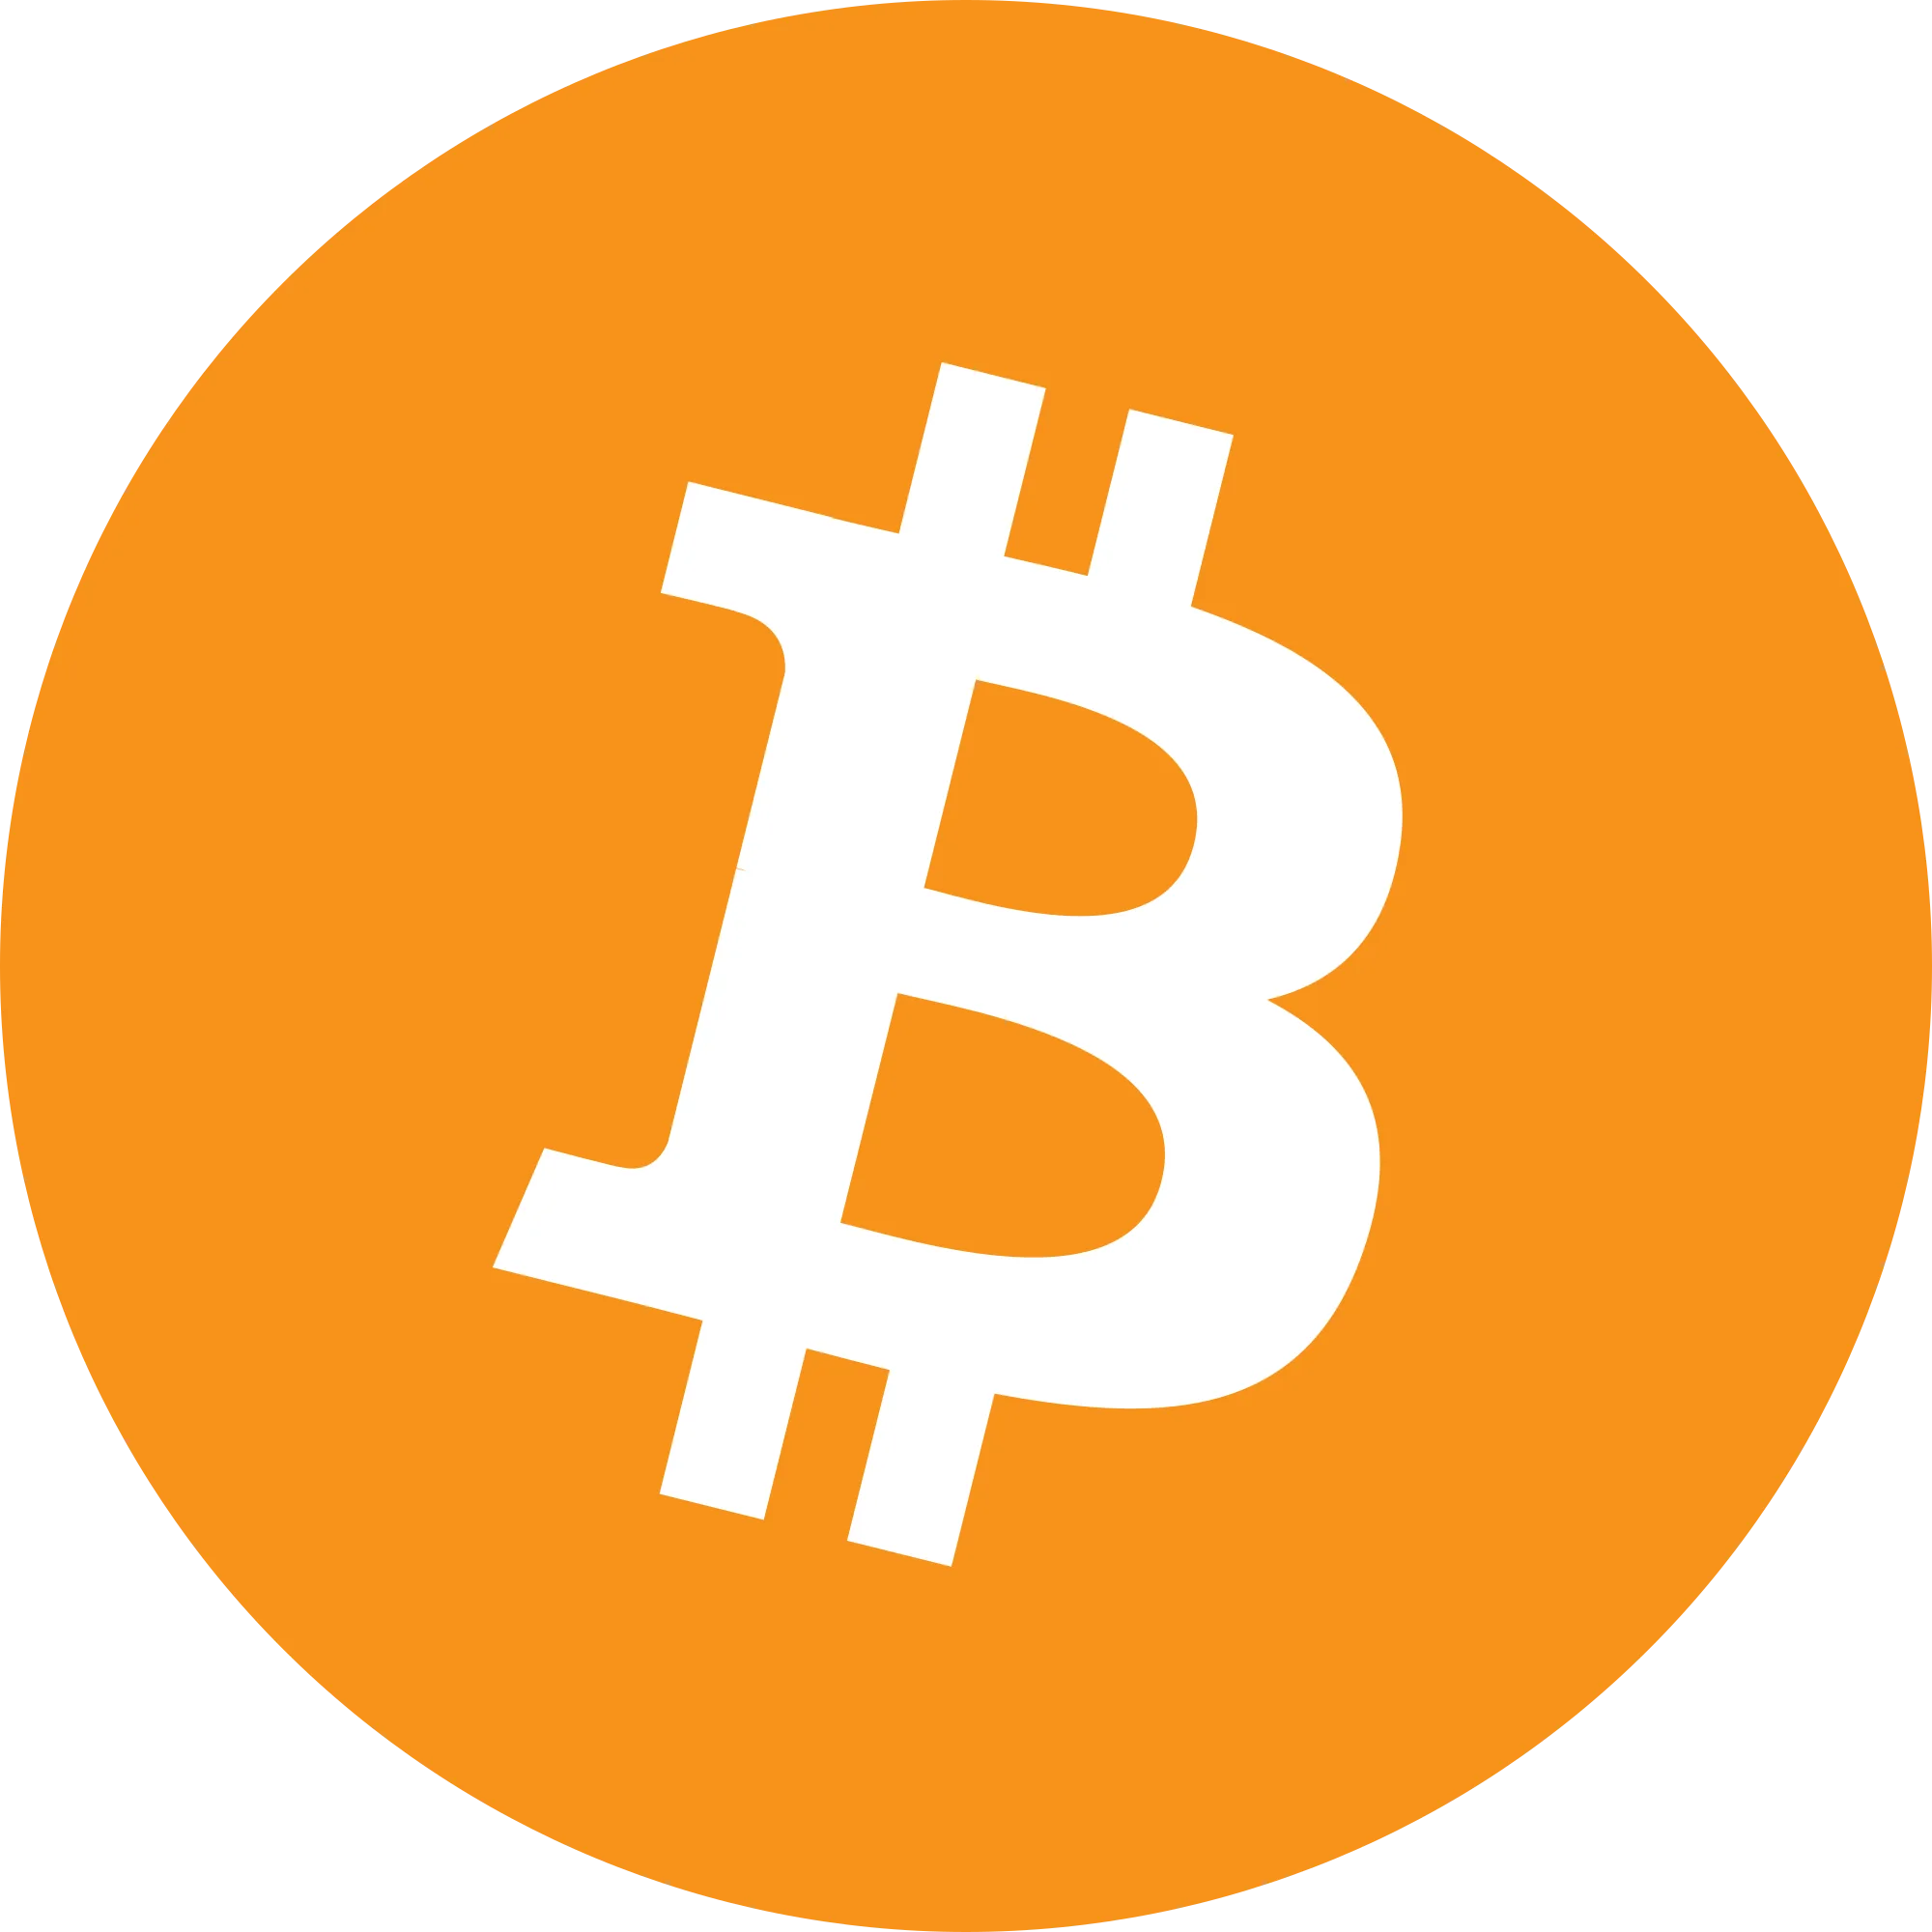 Bitcoin logo in png format